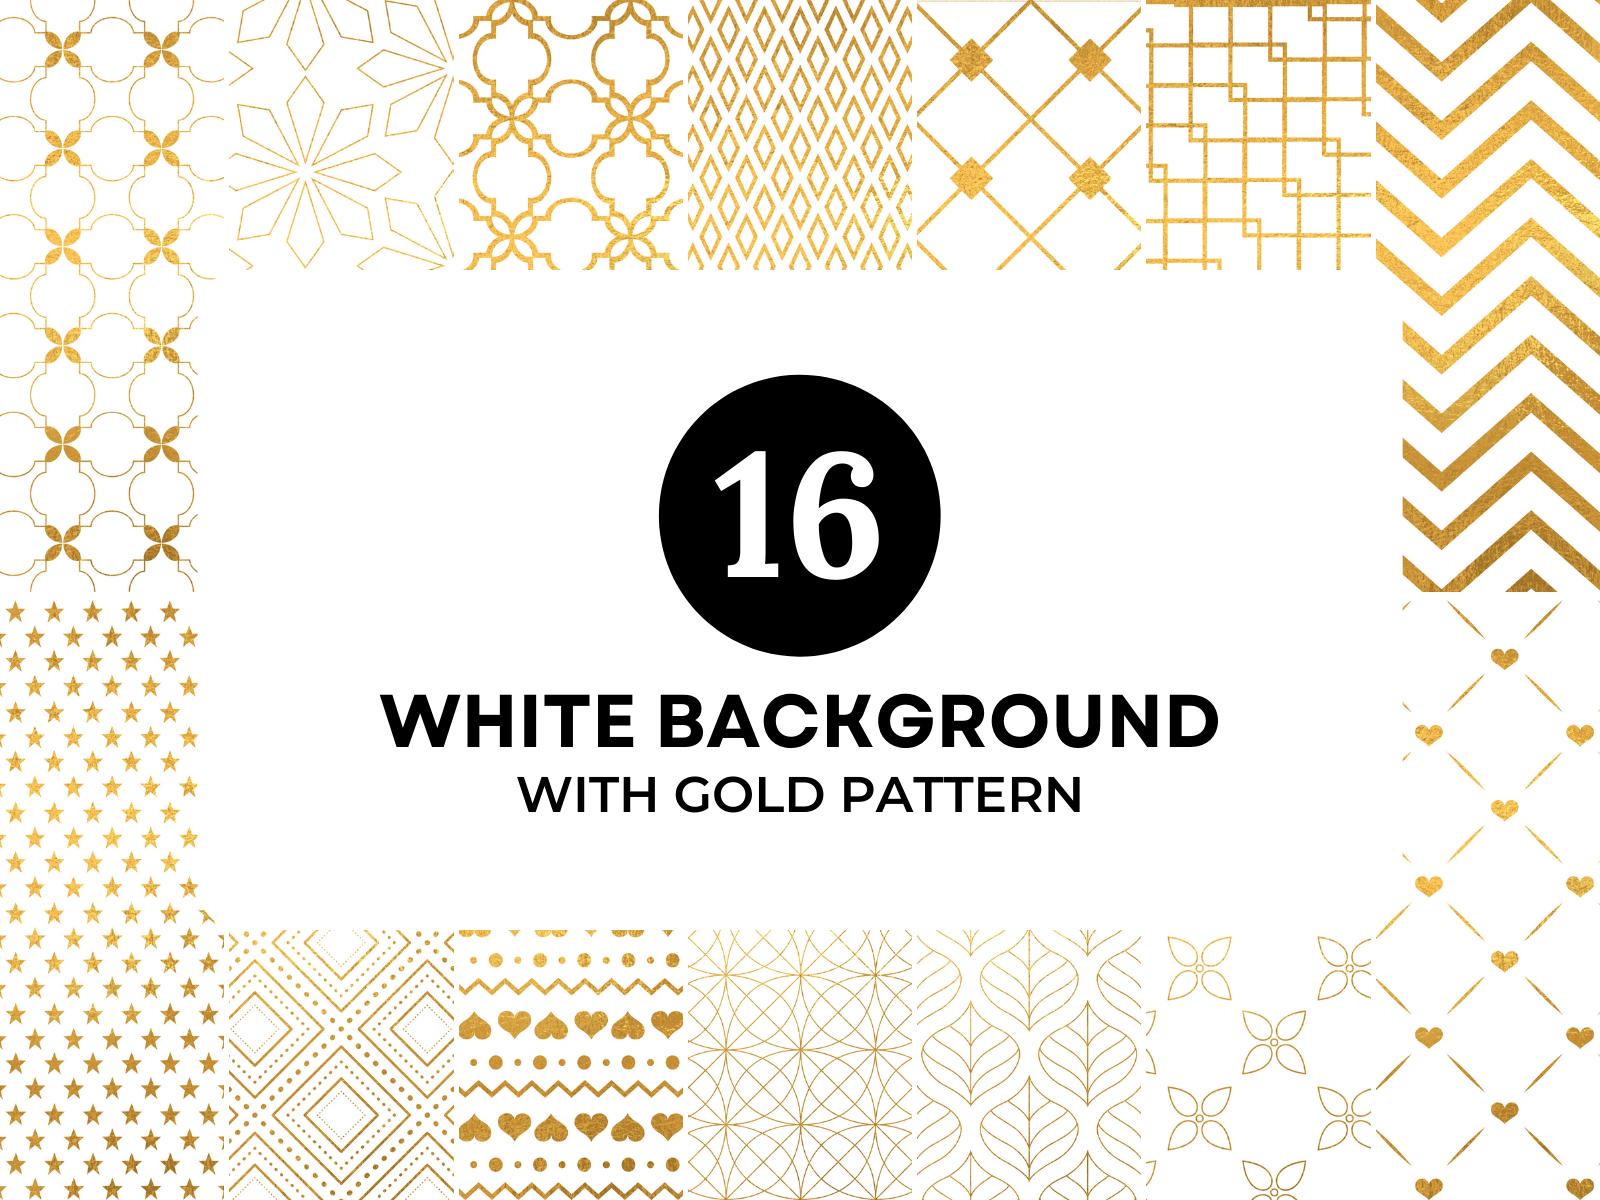 White Background with Gold Pattern